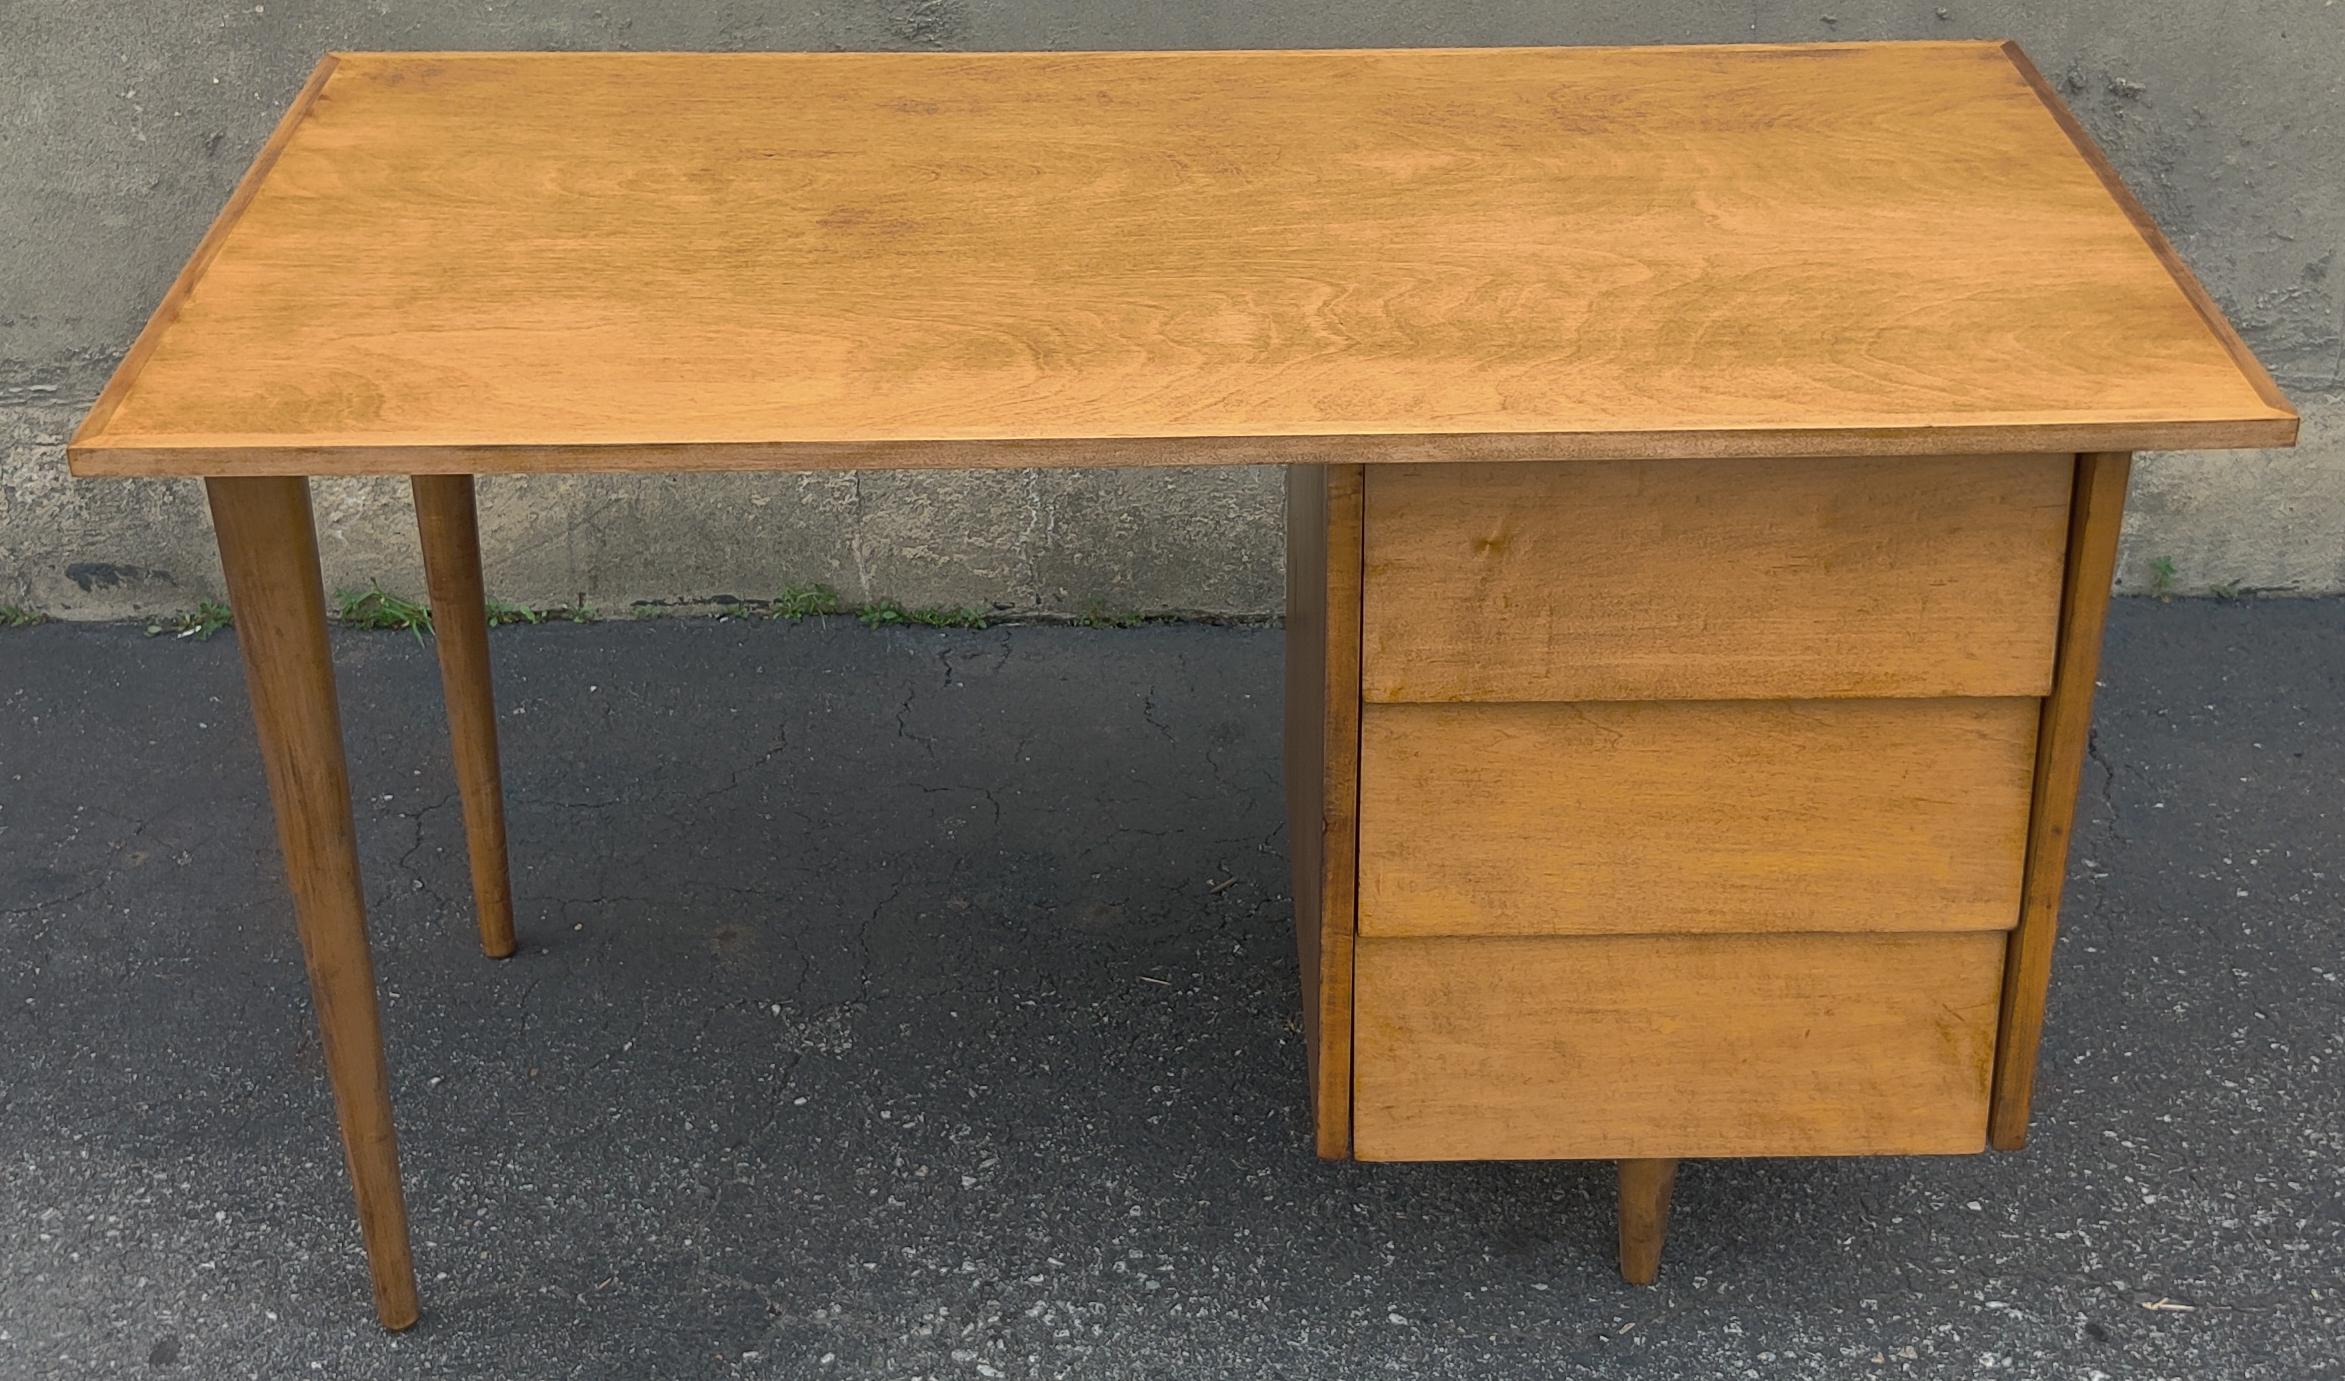 This rare desk was designed in the 1950s by Florence Knoll with a simplistic profile that has proven to be timeless! Of solid maple construction, it features tapered dowel legs and a single pedestal with three large drawers, topped by a neatly